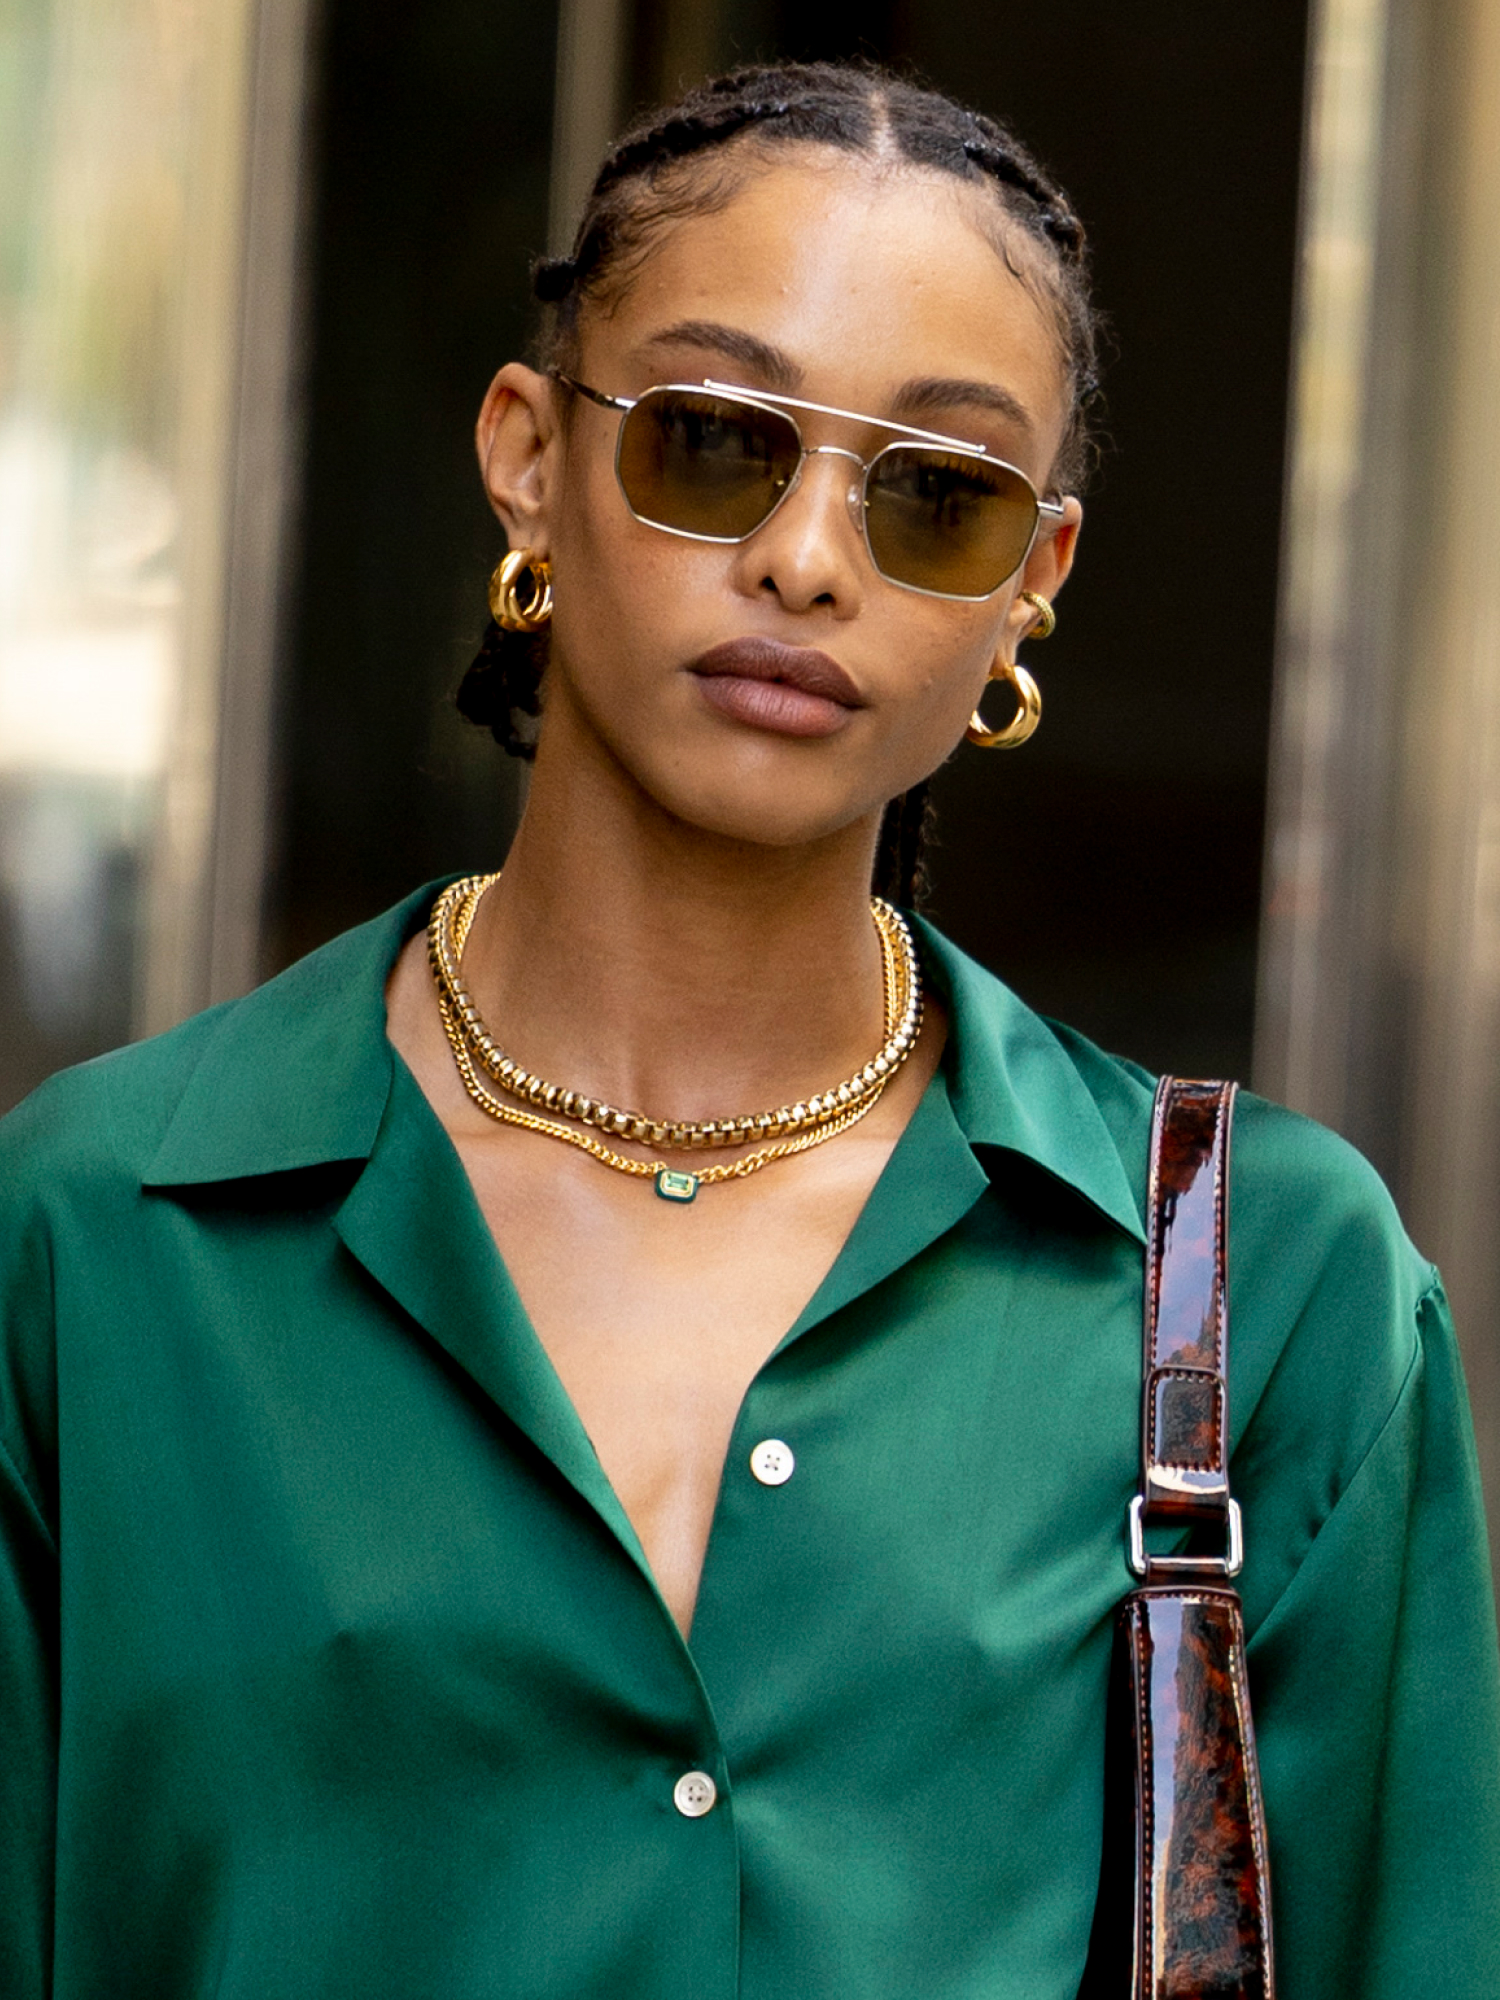 Layered necklace trend style